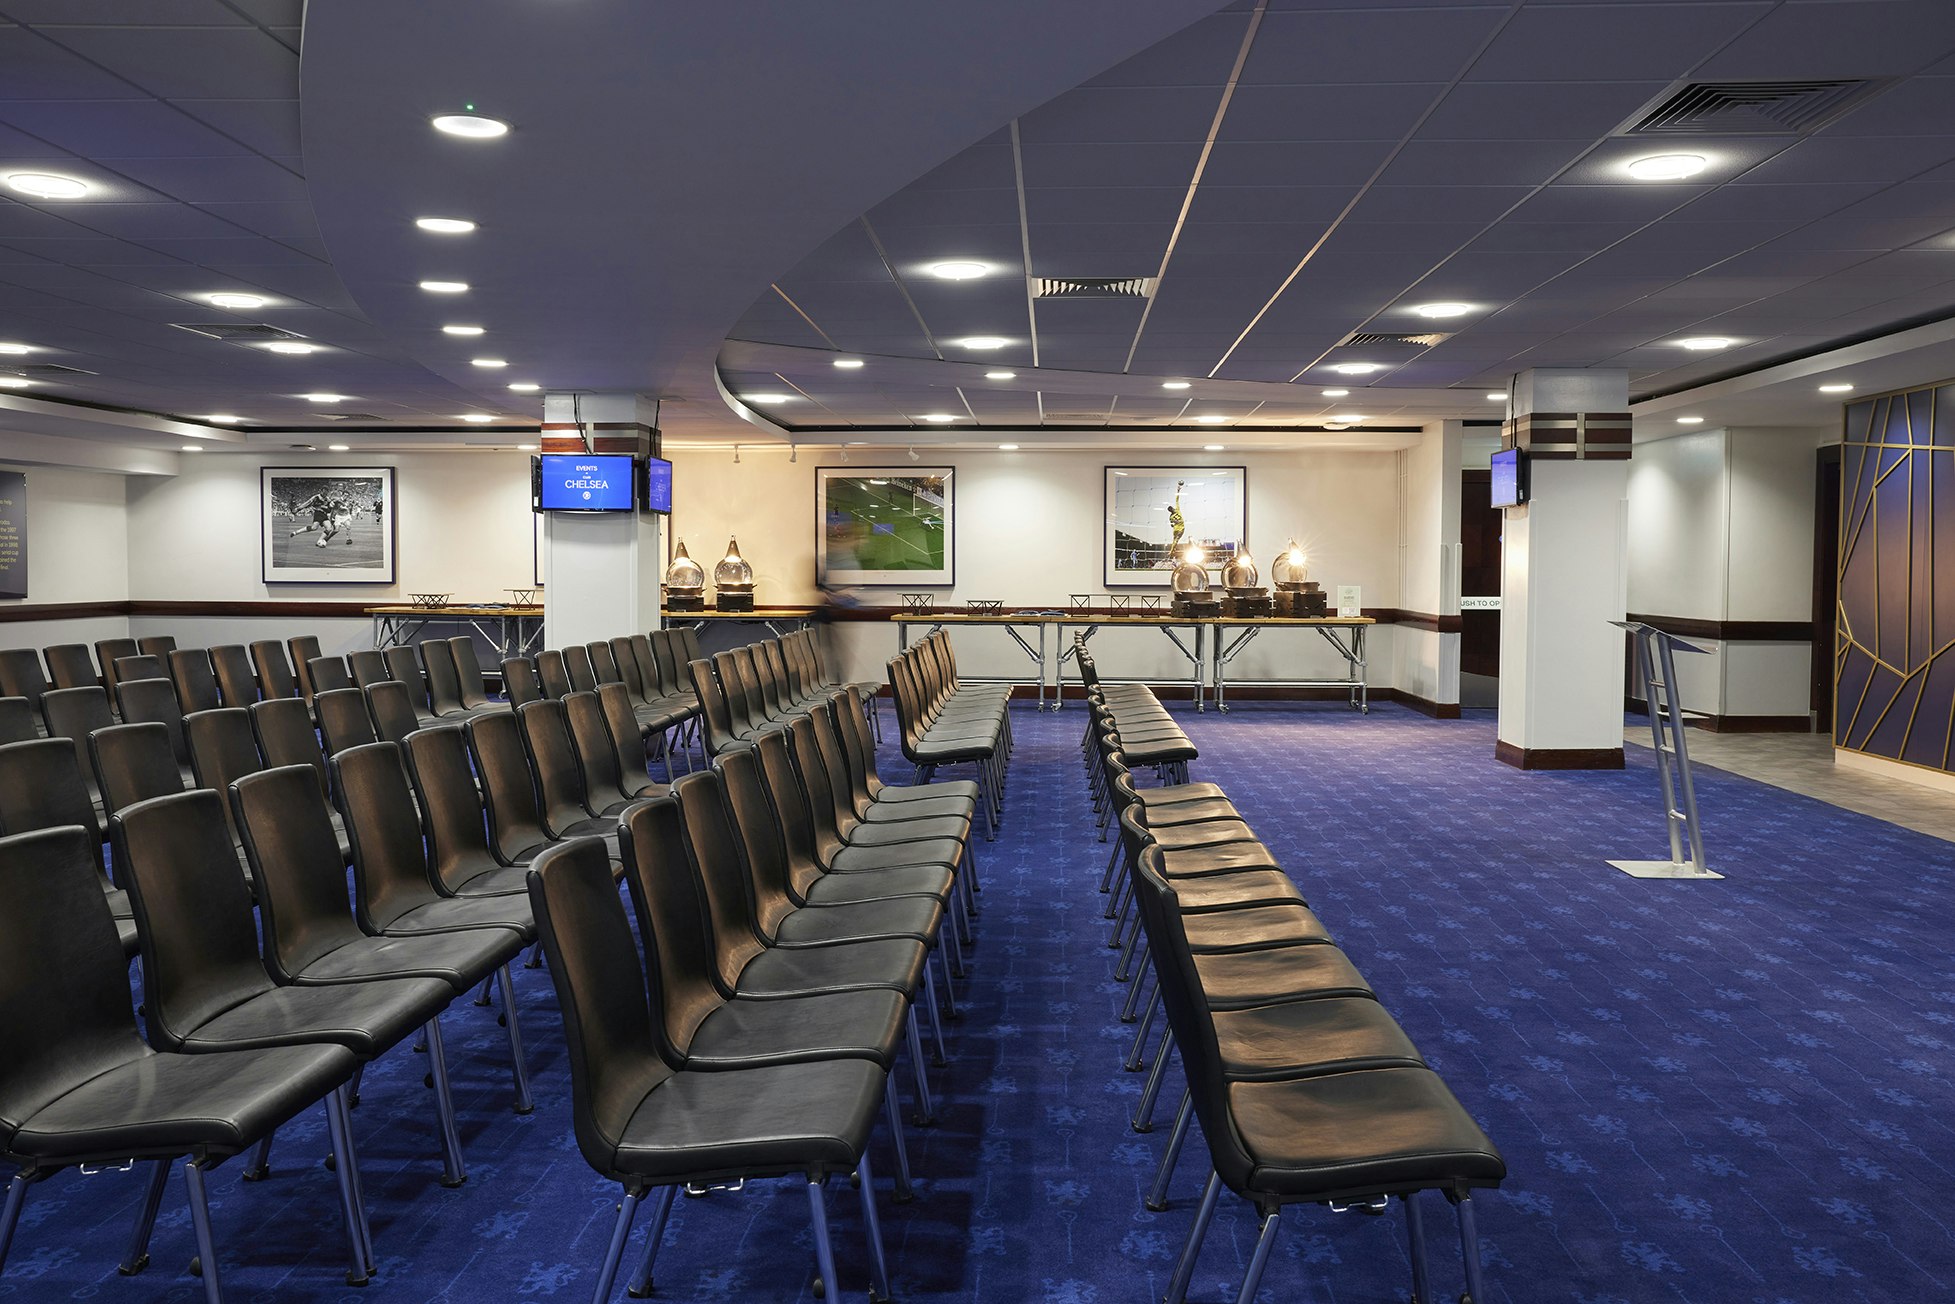 Chelsea Football Club - Bonnetti Suite and Clarke Suite image 7